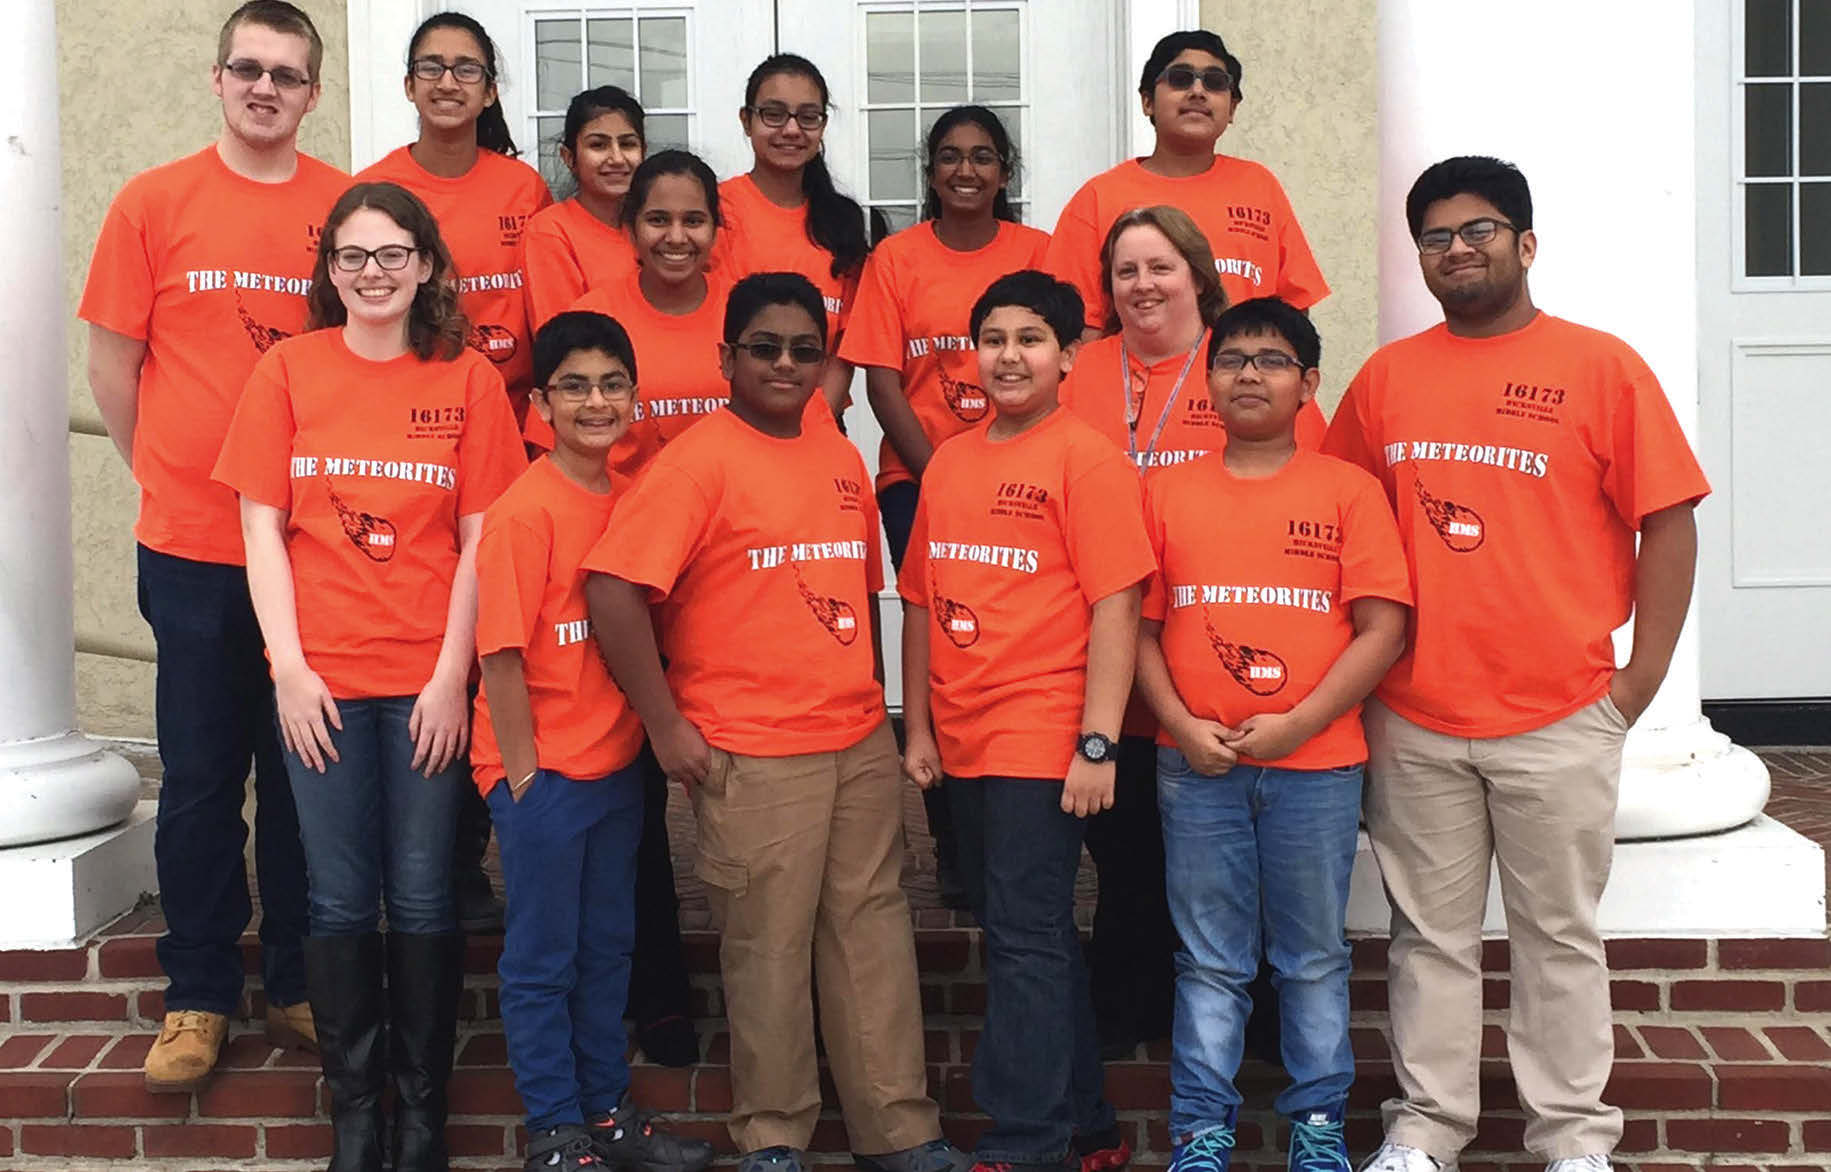 A rookie team, Hicksville Middle School's Meteorites has reached the FIRST LEGO Robotics Competition. Their mentor Shiv Chopra (front row, extreme right) is President of Hicksville High School's robotics program.